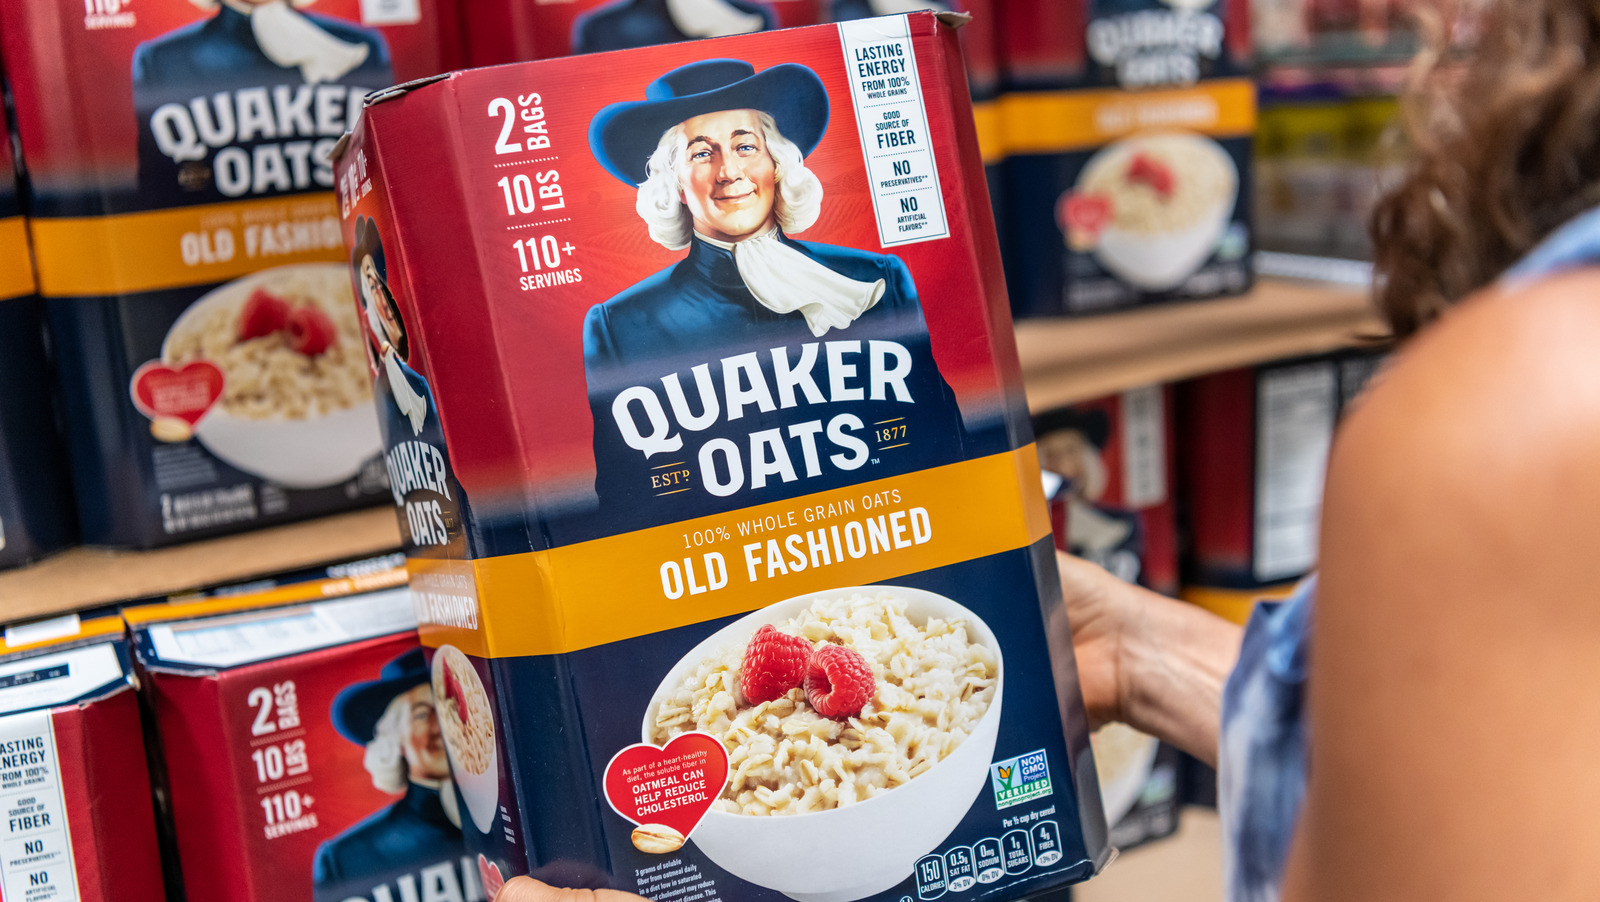 Quaker Oats Company, est. 1877 - Made-in-Chicago Museum